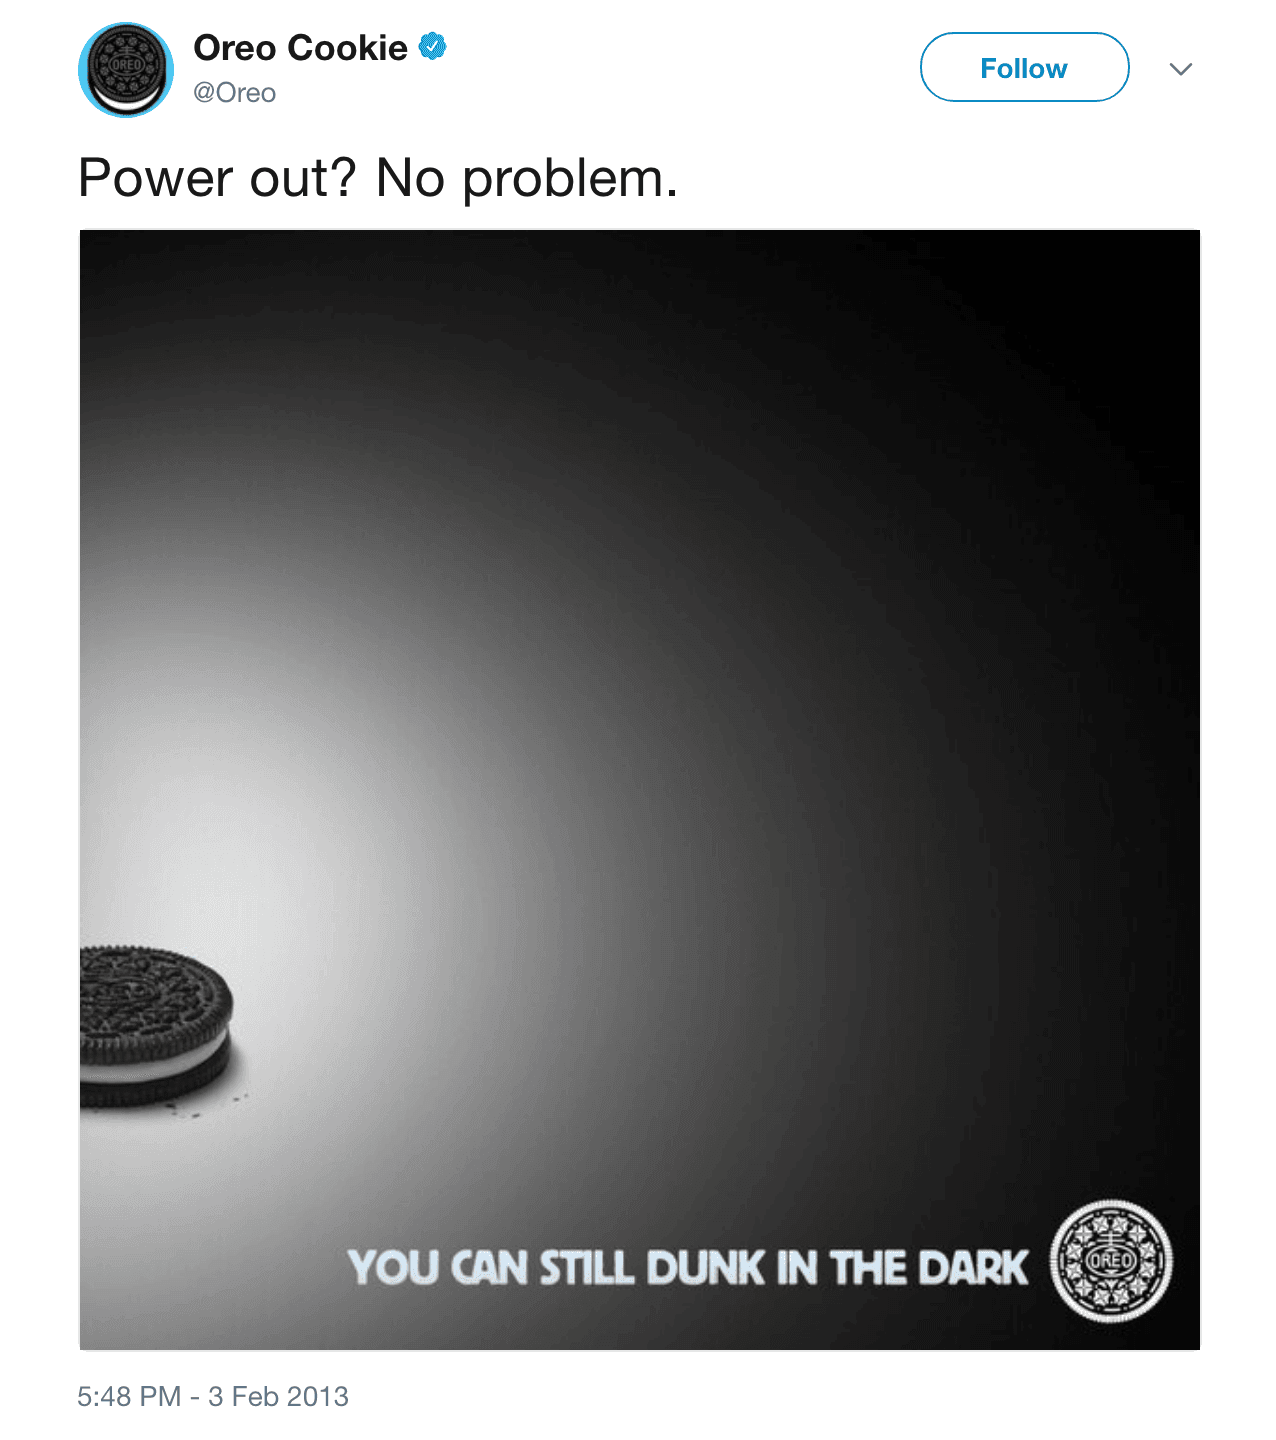 Oreo tweet reading 'Power out? No problem.', and 'You can still dunk in the dark.'